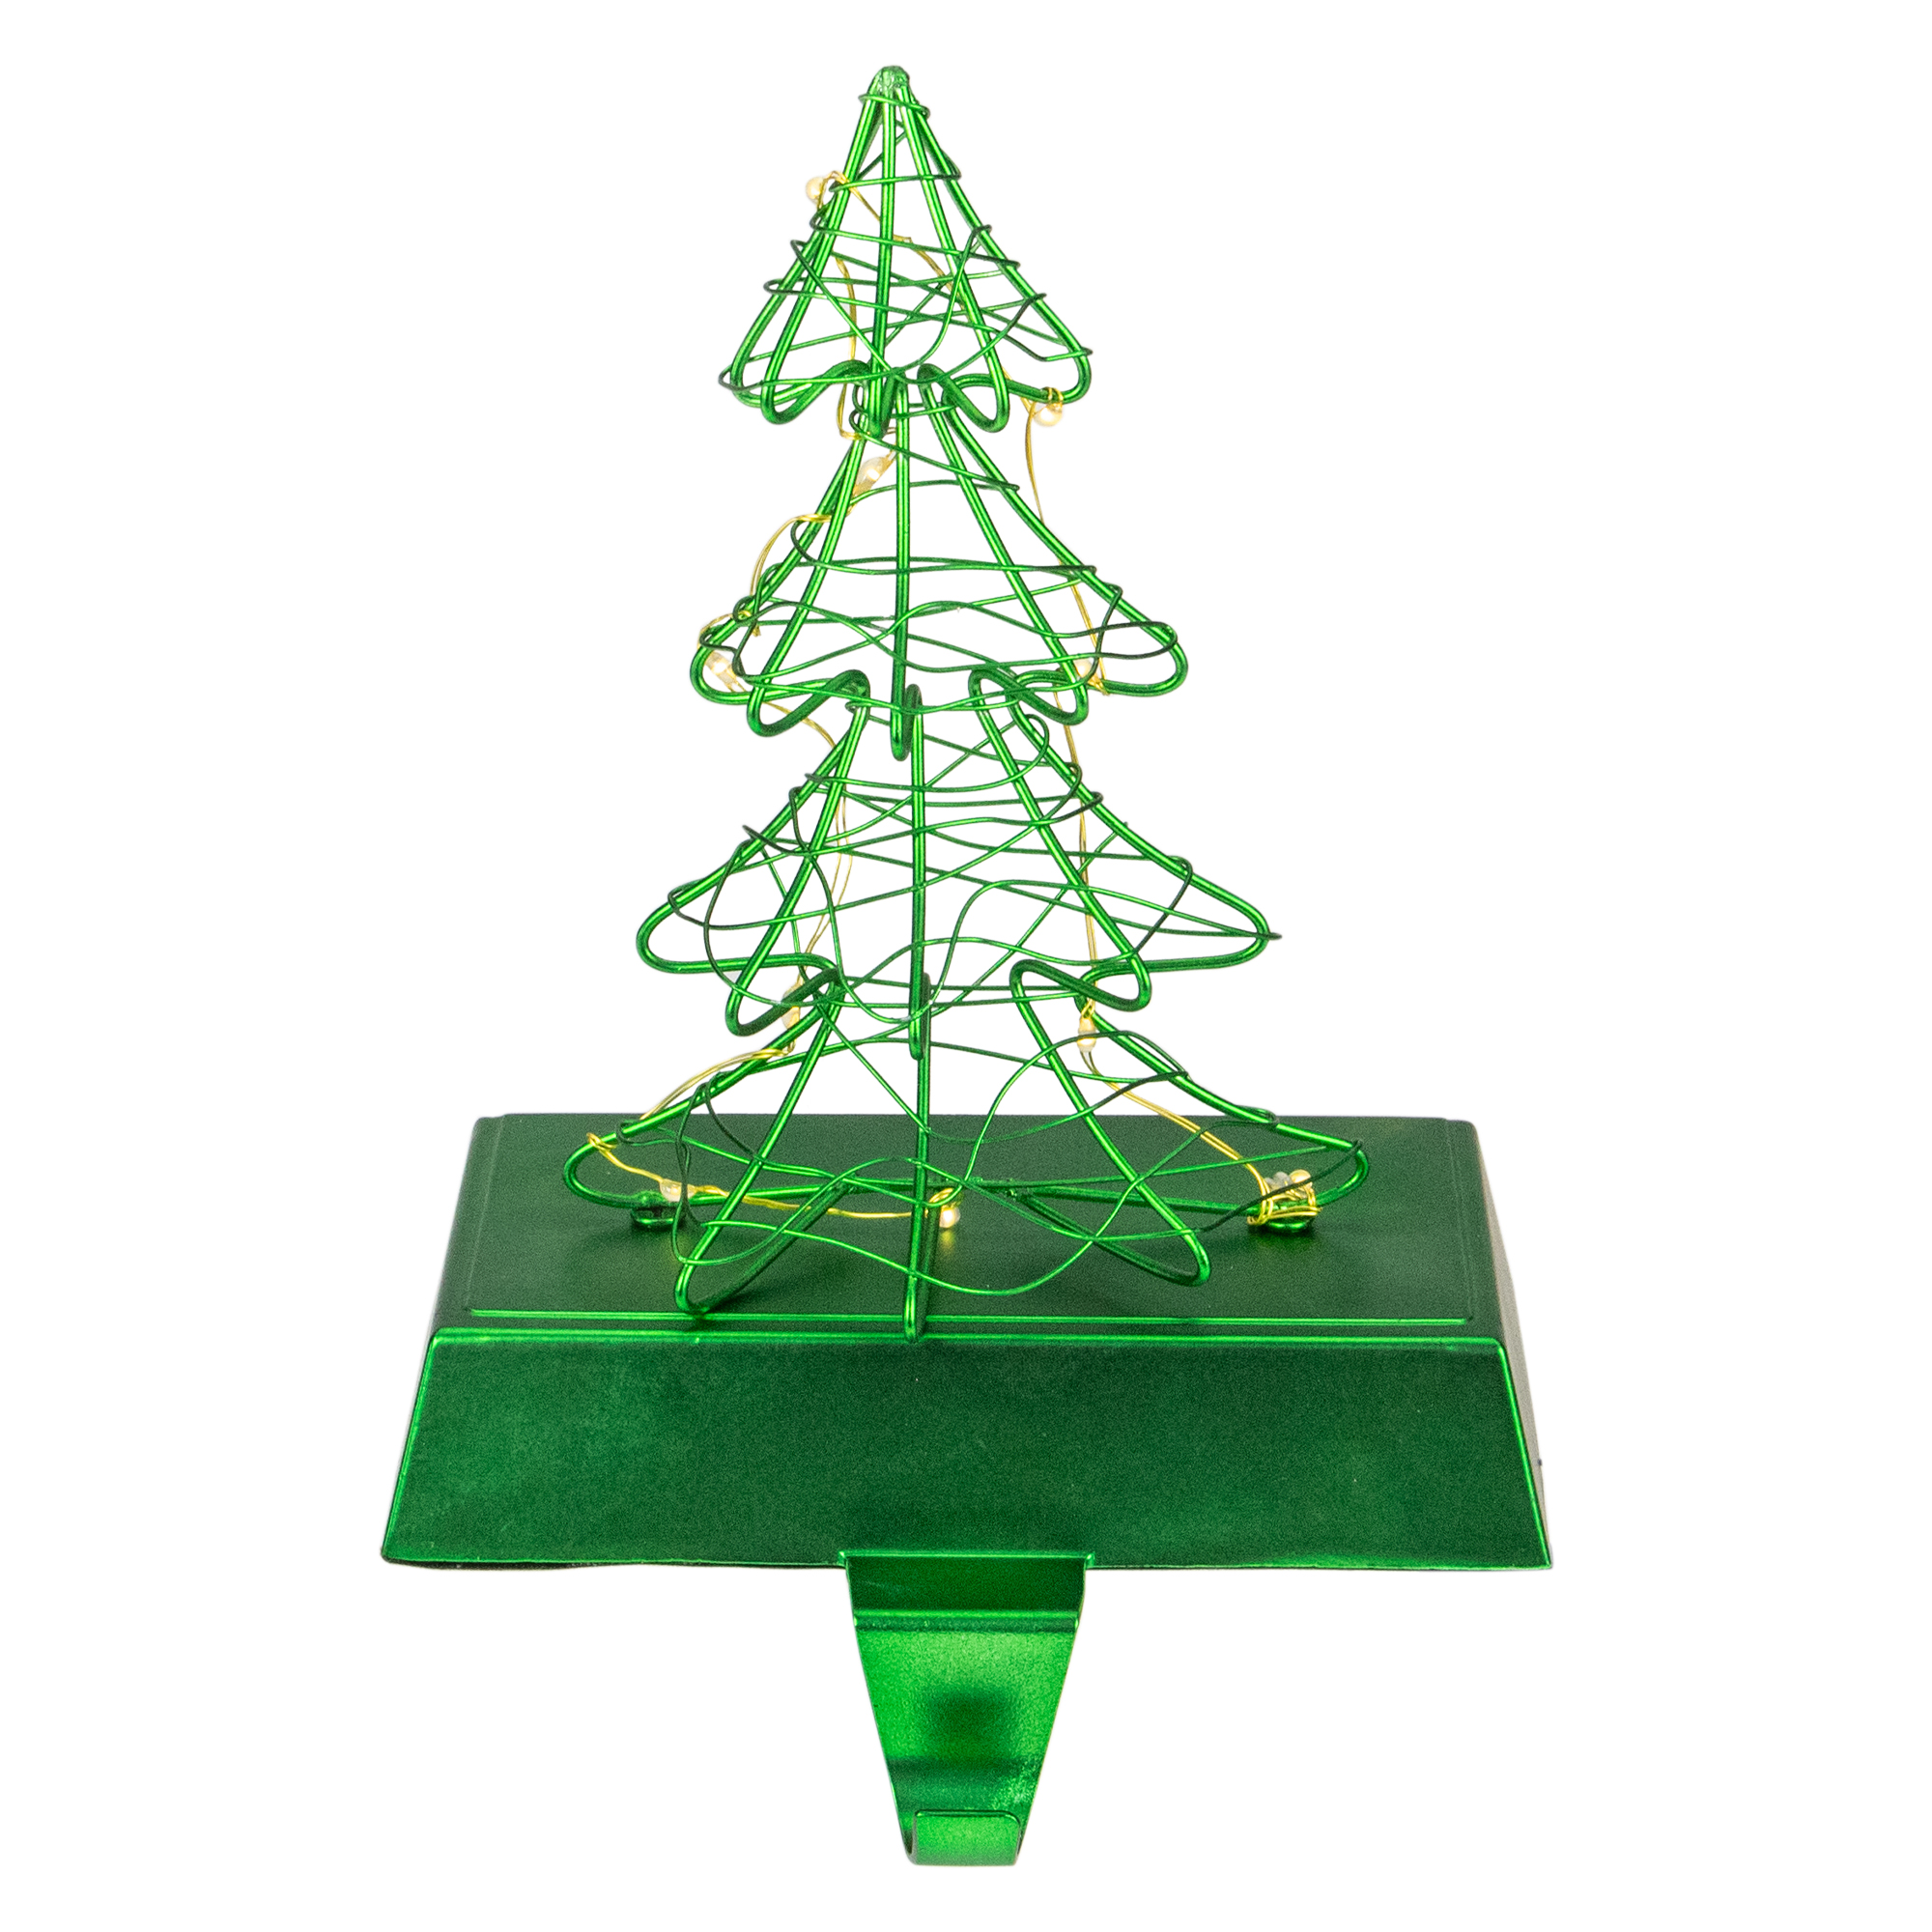 Northlight 8" LED Lighted Green Wired Christmas Tree Stocking Holder